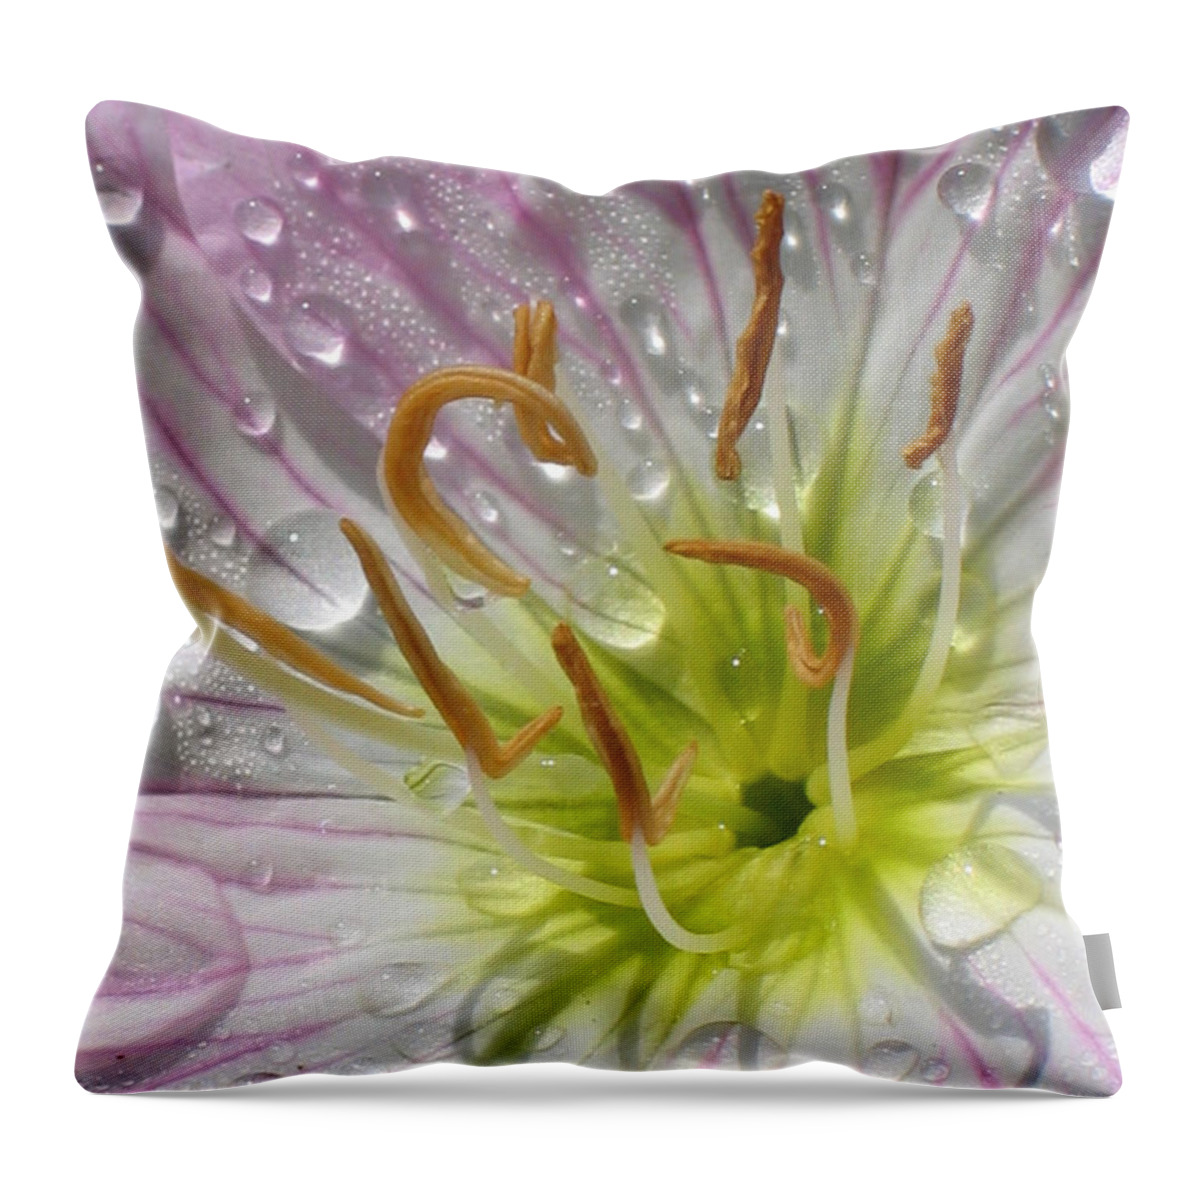 Primrose Throw Pillow featuring the photograph Primrose by Jennifer Wheatley Wolf